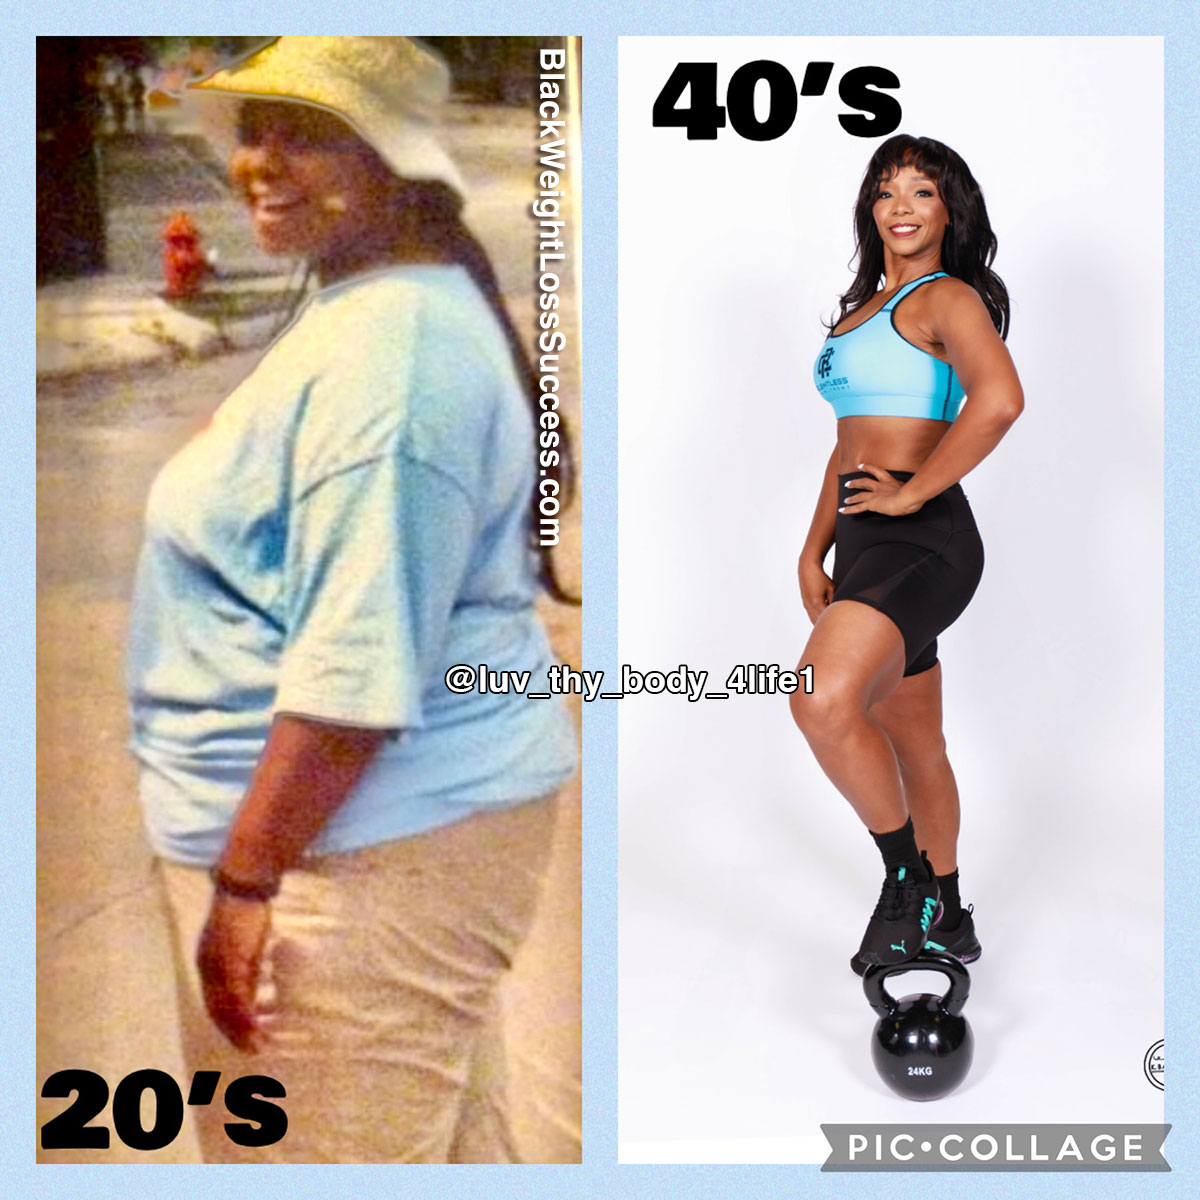 Heather before and after weight loss